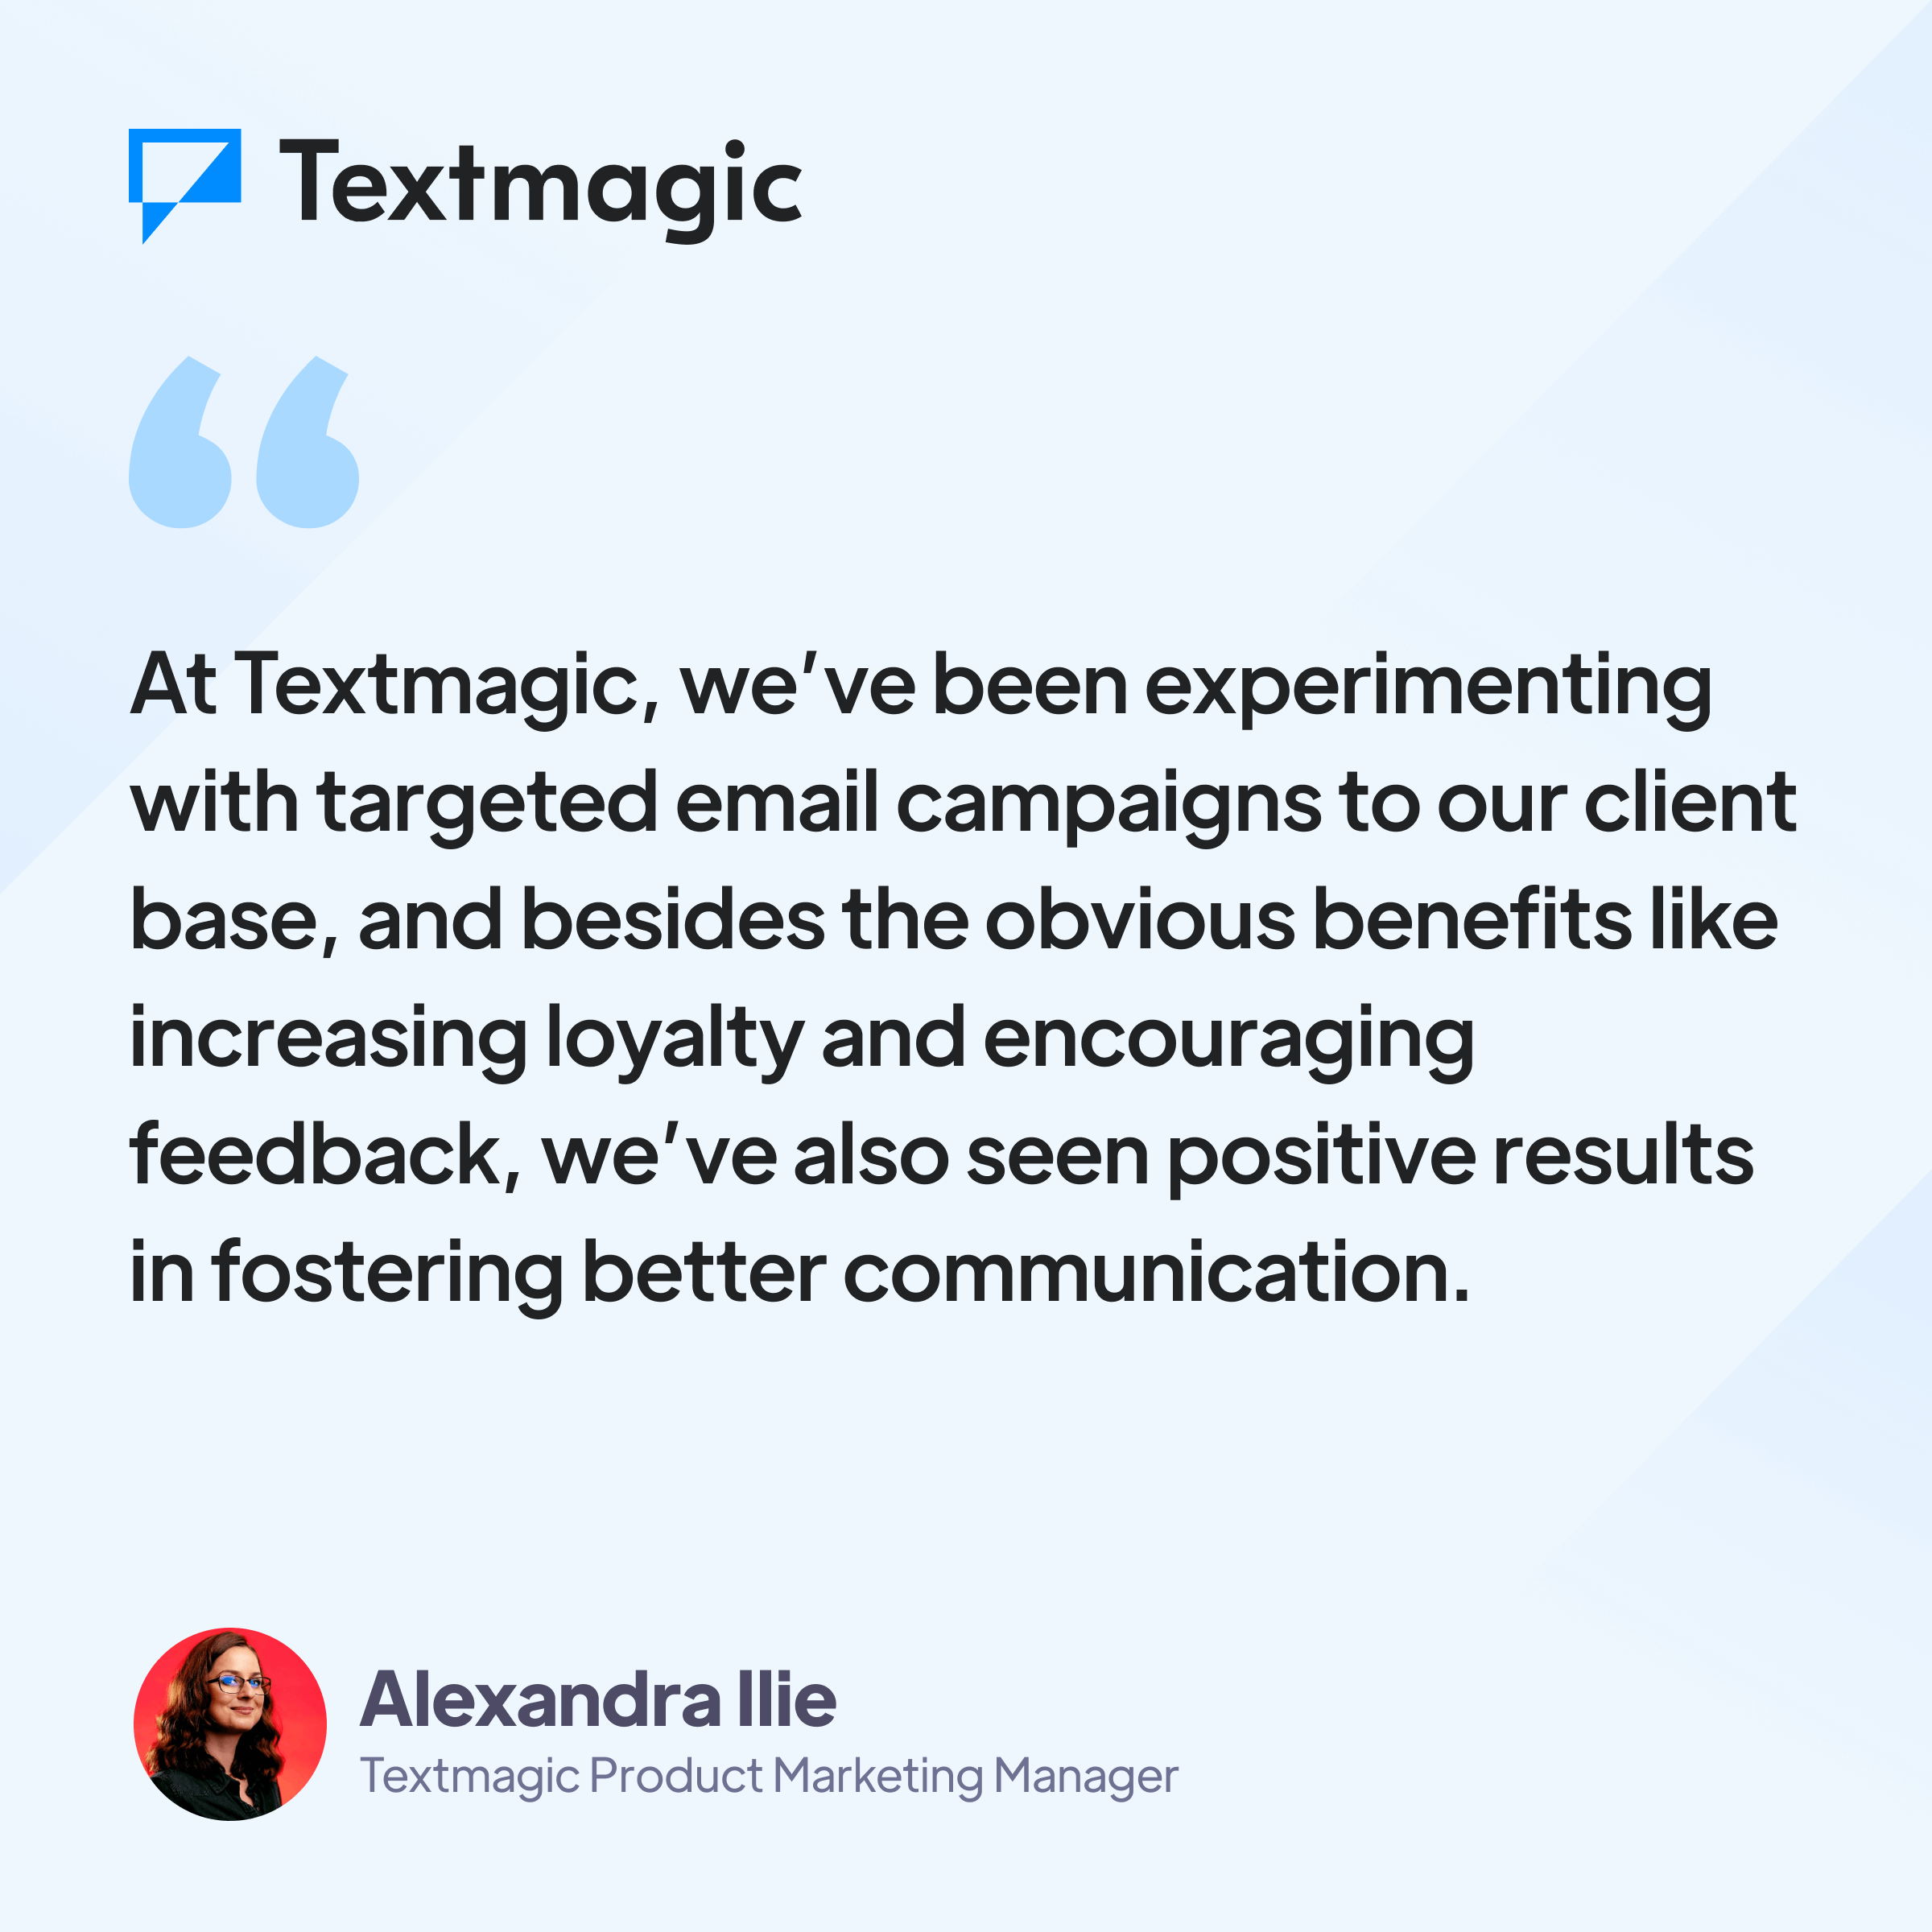 Quote from Textmagic product marketing manager